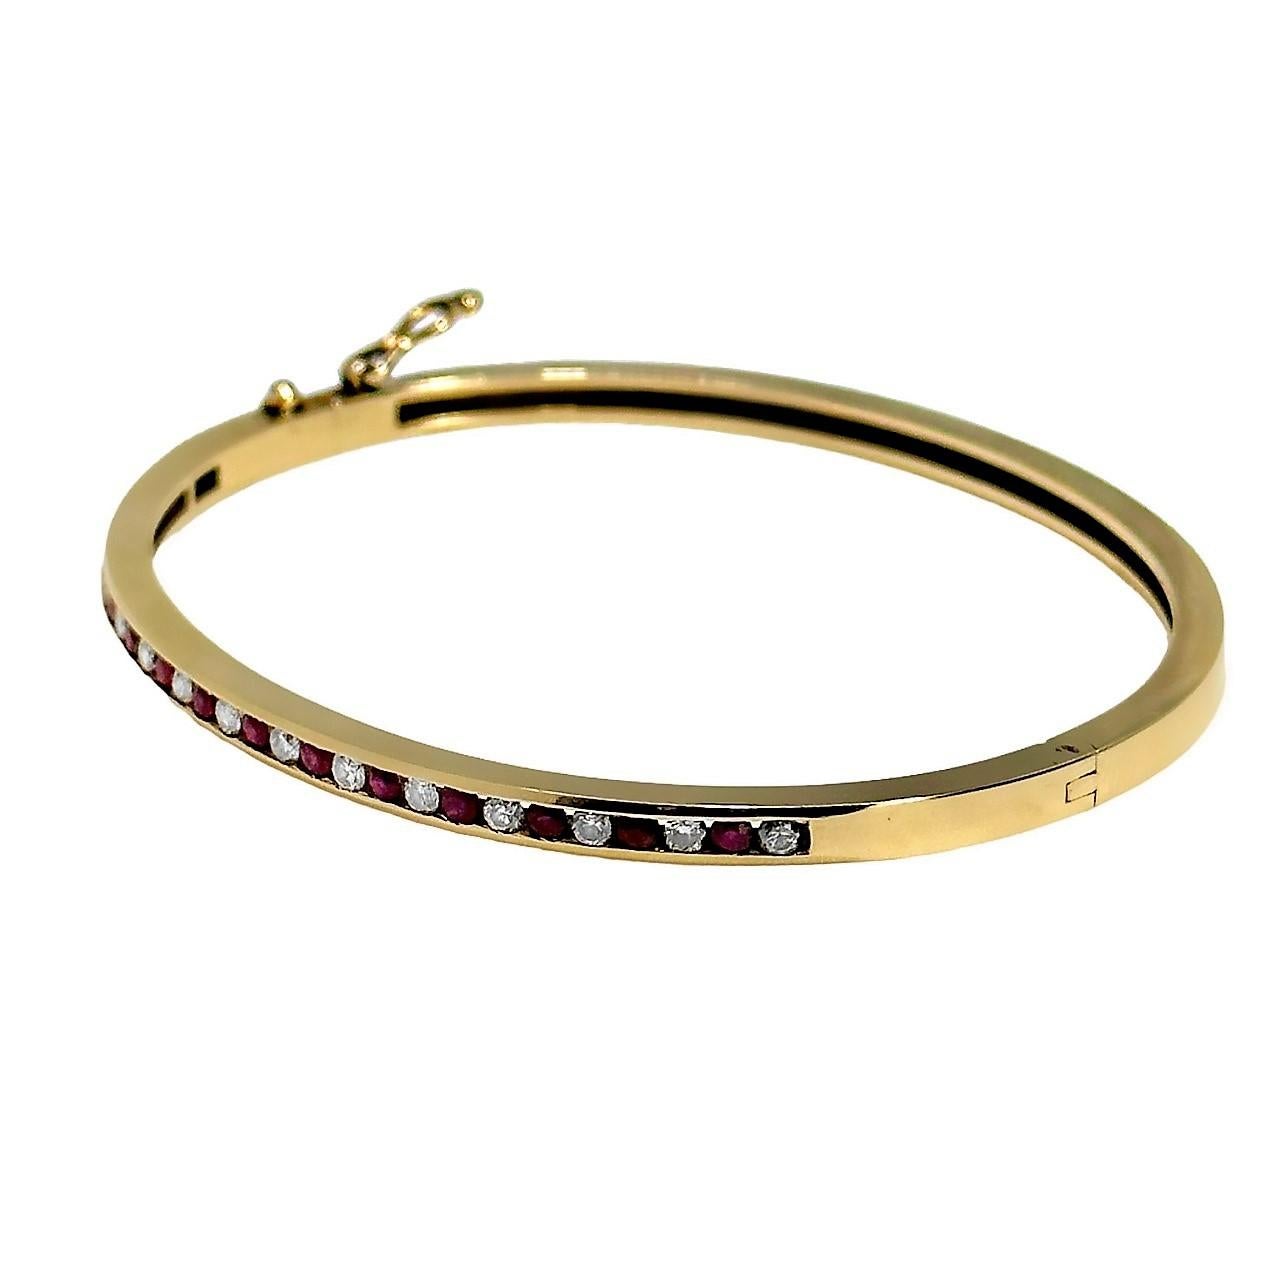 Brilliant Cut Precision Crafted Channel Set Yellow Gold Ruby and Diamond Bangle Bracelet